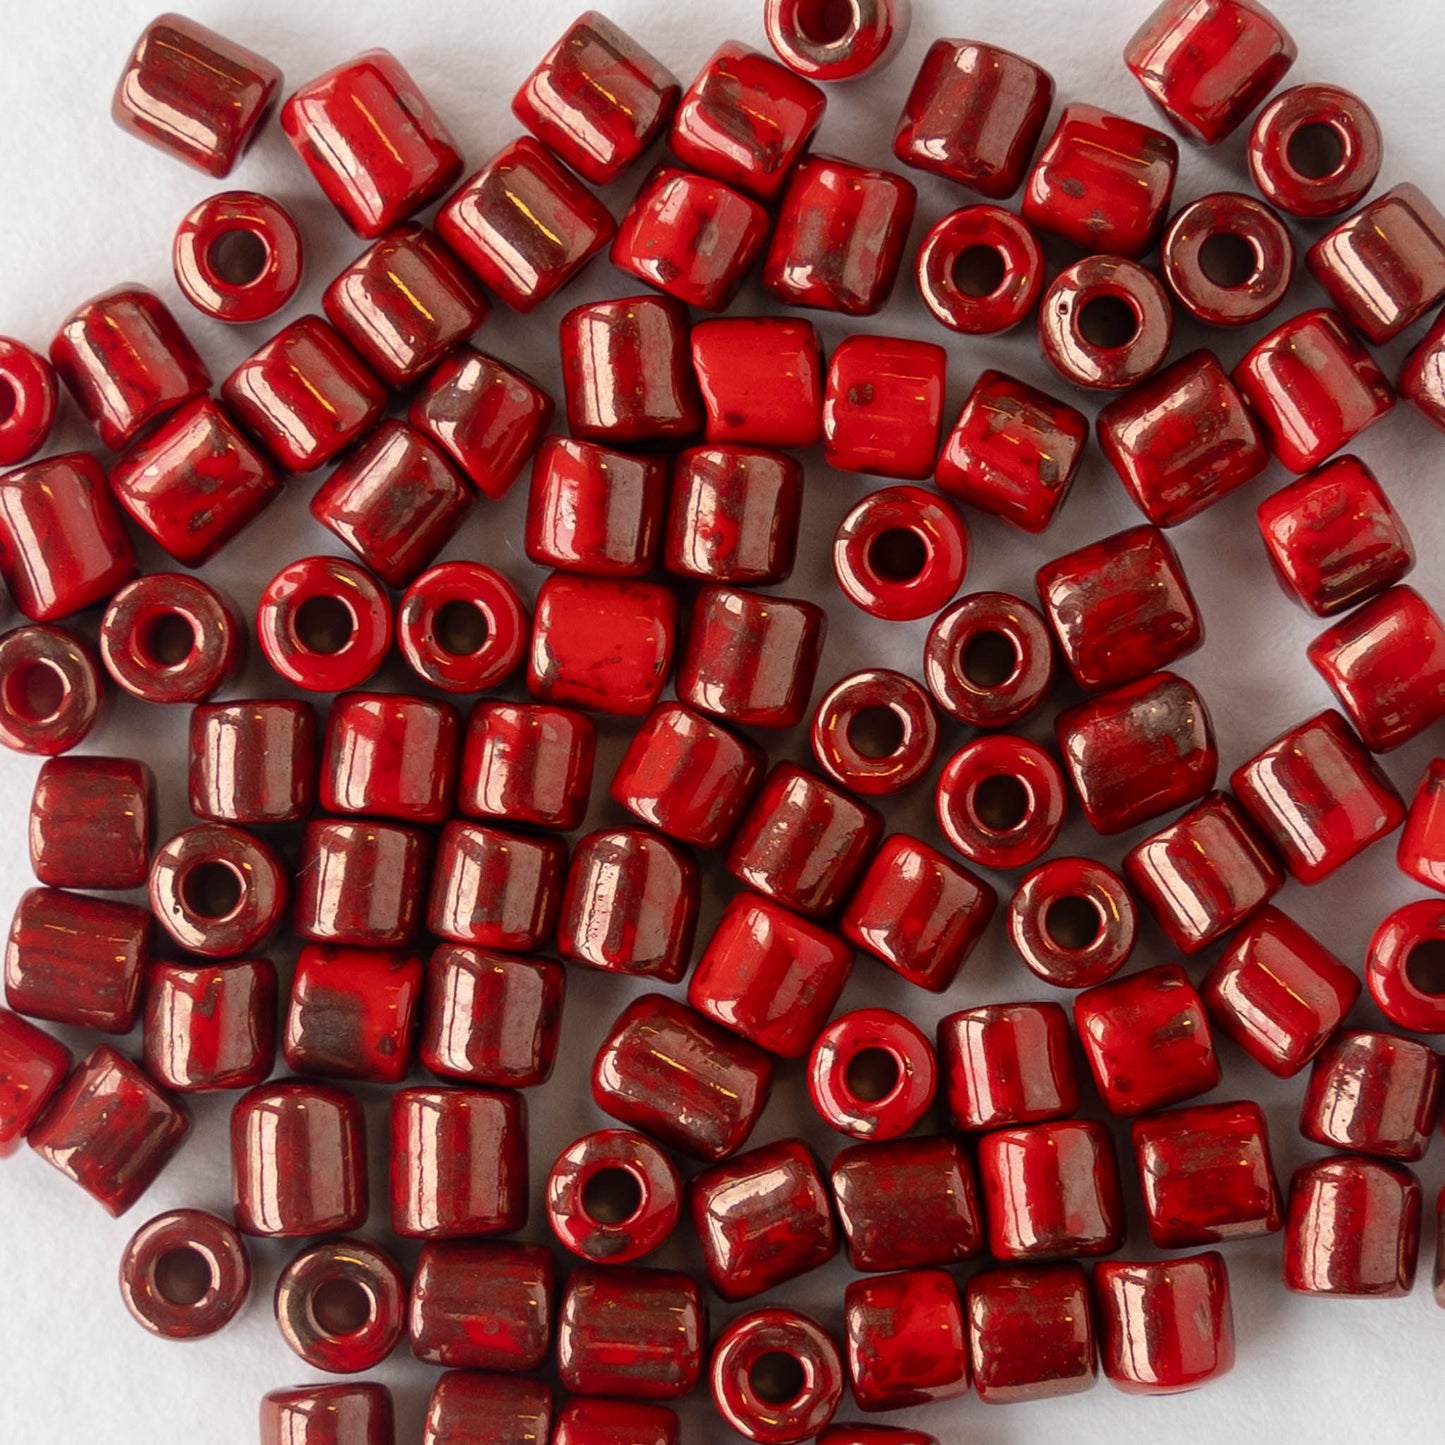 4x4mm Picasso Tube Beads - Glazed Opaque Red - 20 inches